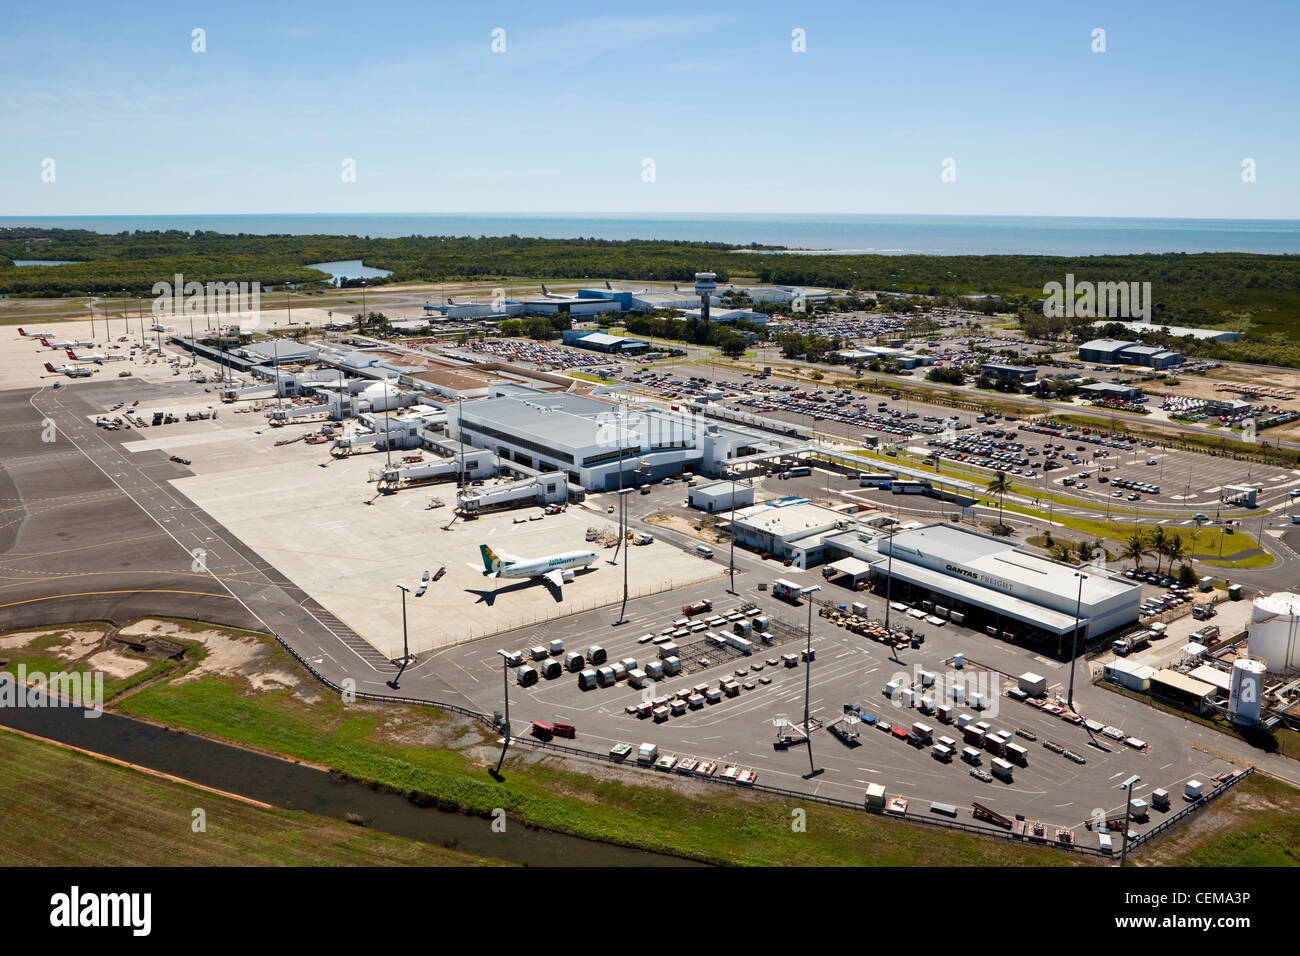 Aerial view of Cairns airport. Cairns, Queensland, Australia Stock Photo